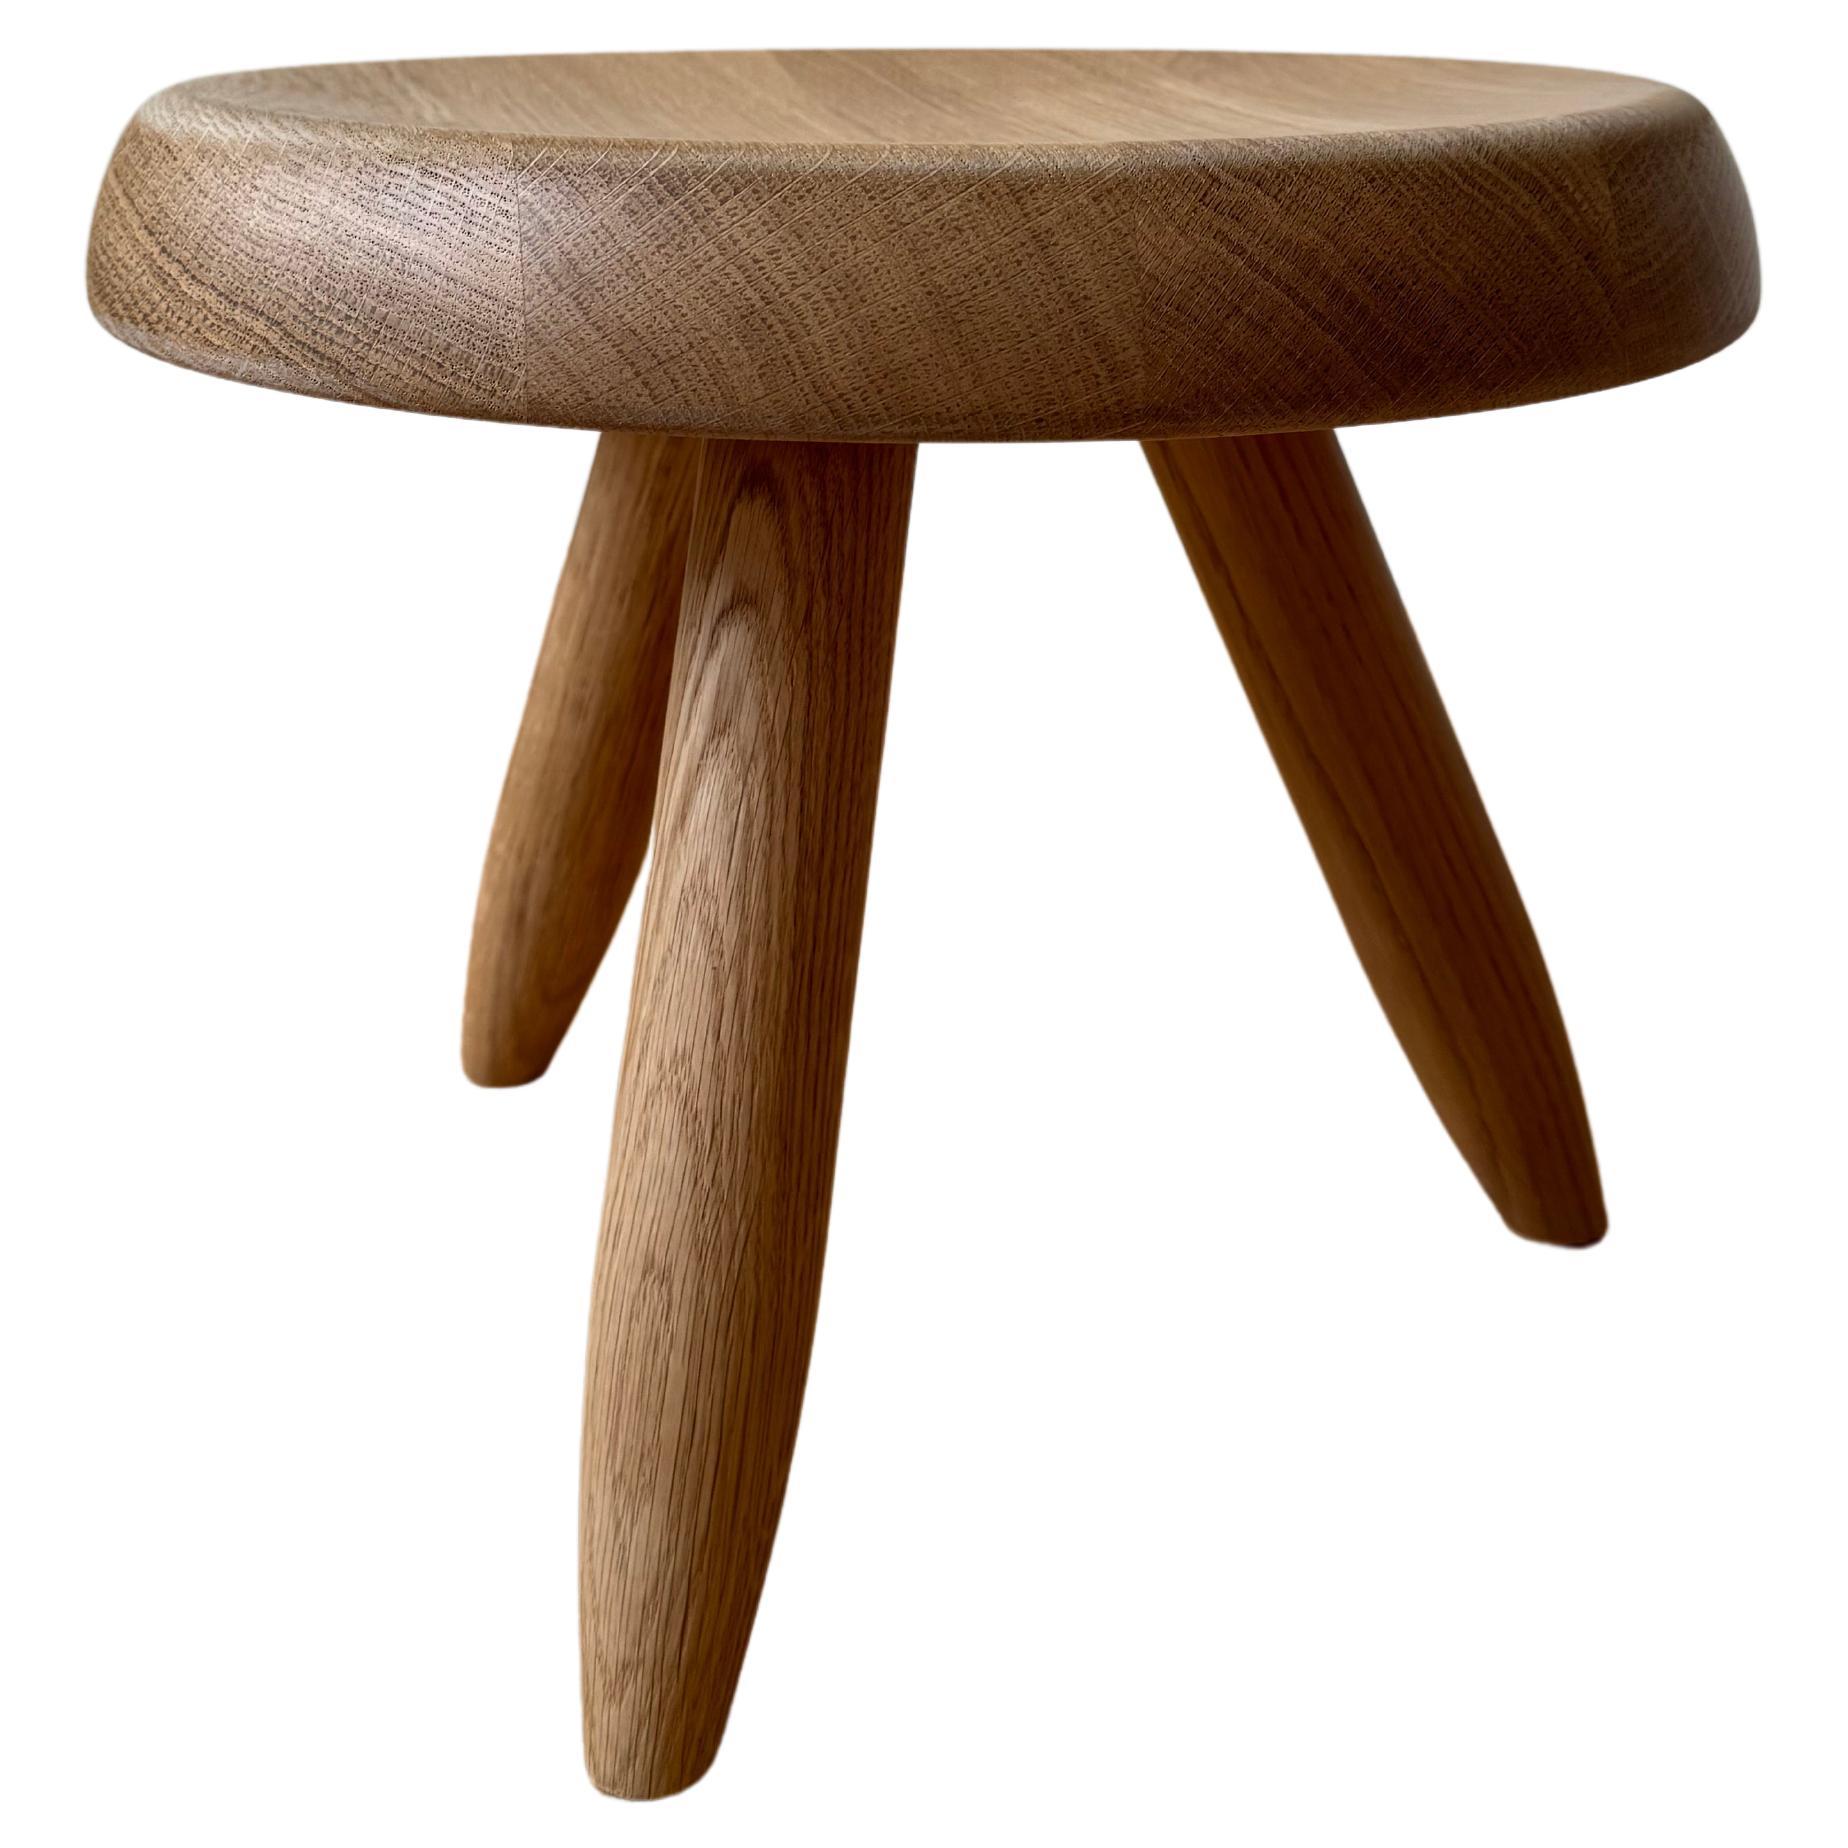 Tabouret Berger (Berger Stool) by Charlotte Perriand for Cassina For Sale